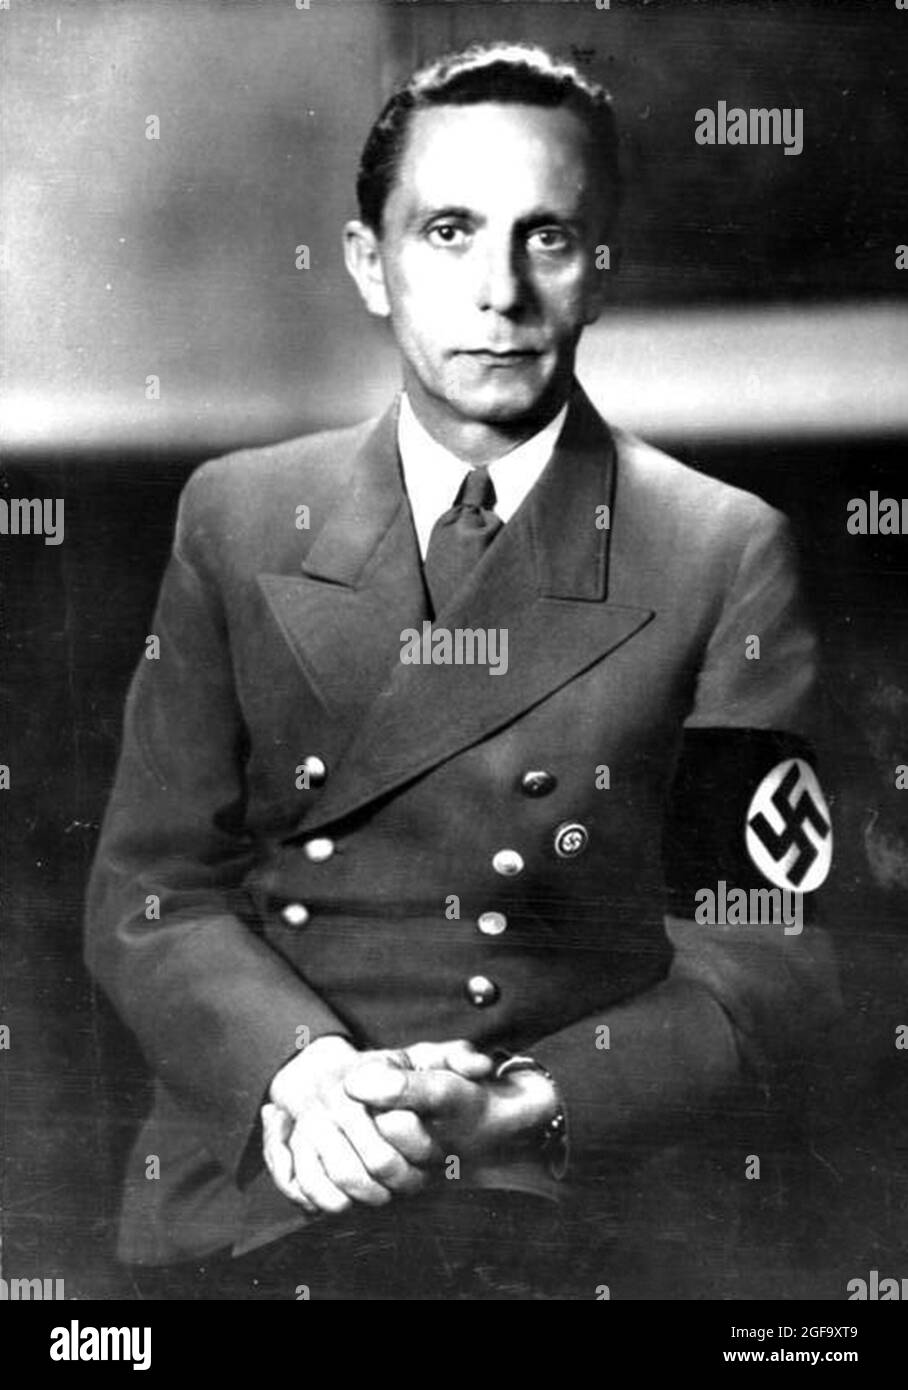 A portrait of Nazi Leader and Minister of Propaganda Joseph Göbbels. He committed suicide with his wife after they poisoned their 6 children in the bunker in 1945. Credit: German Bundesarchiv Stock Photo